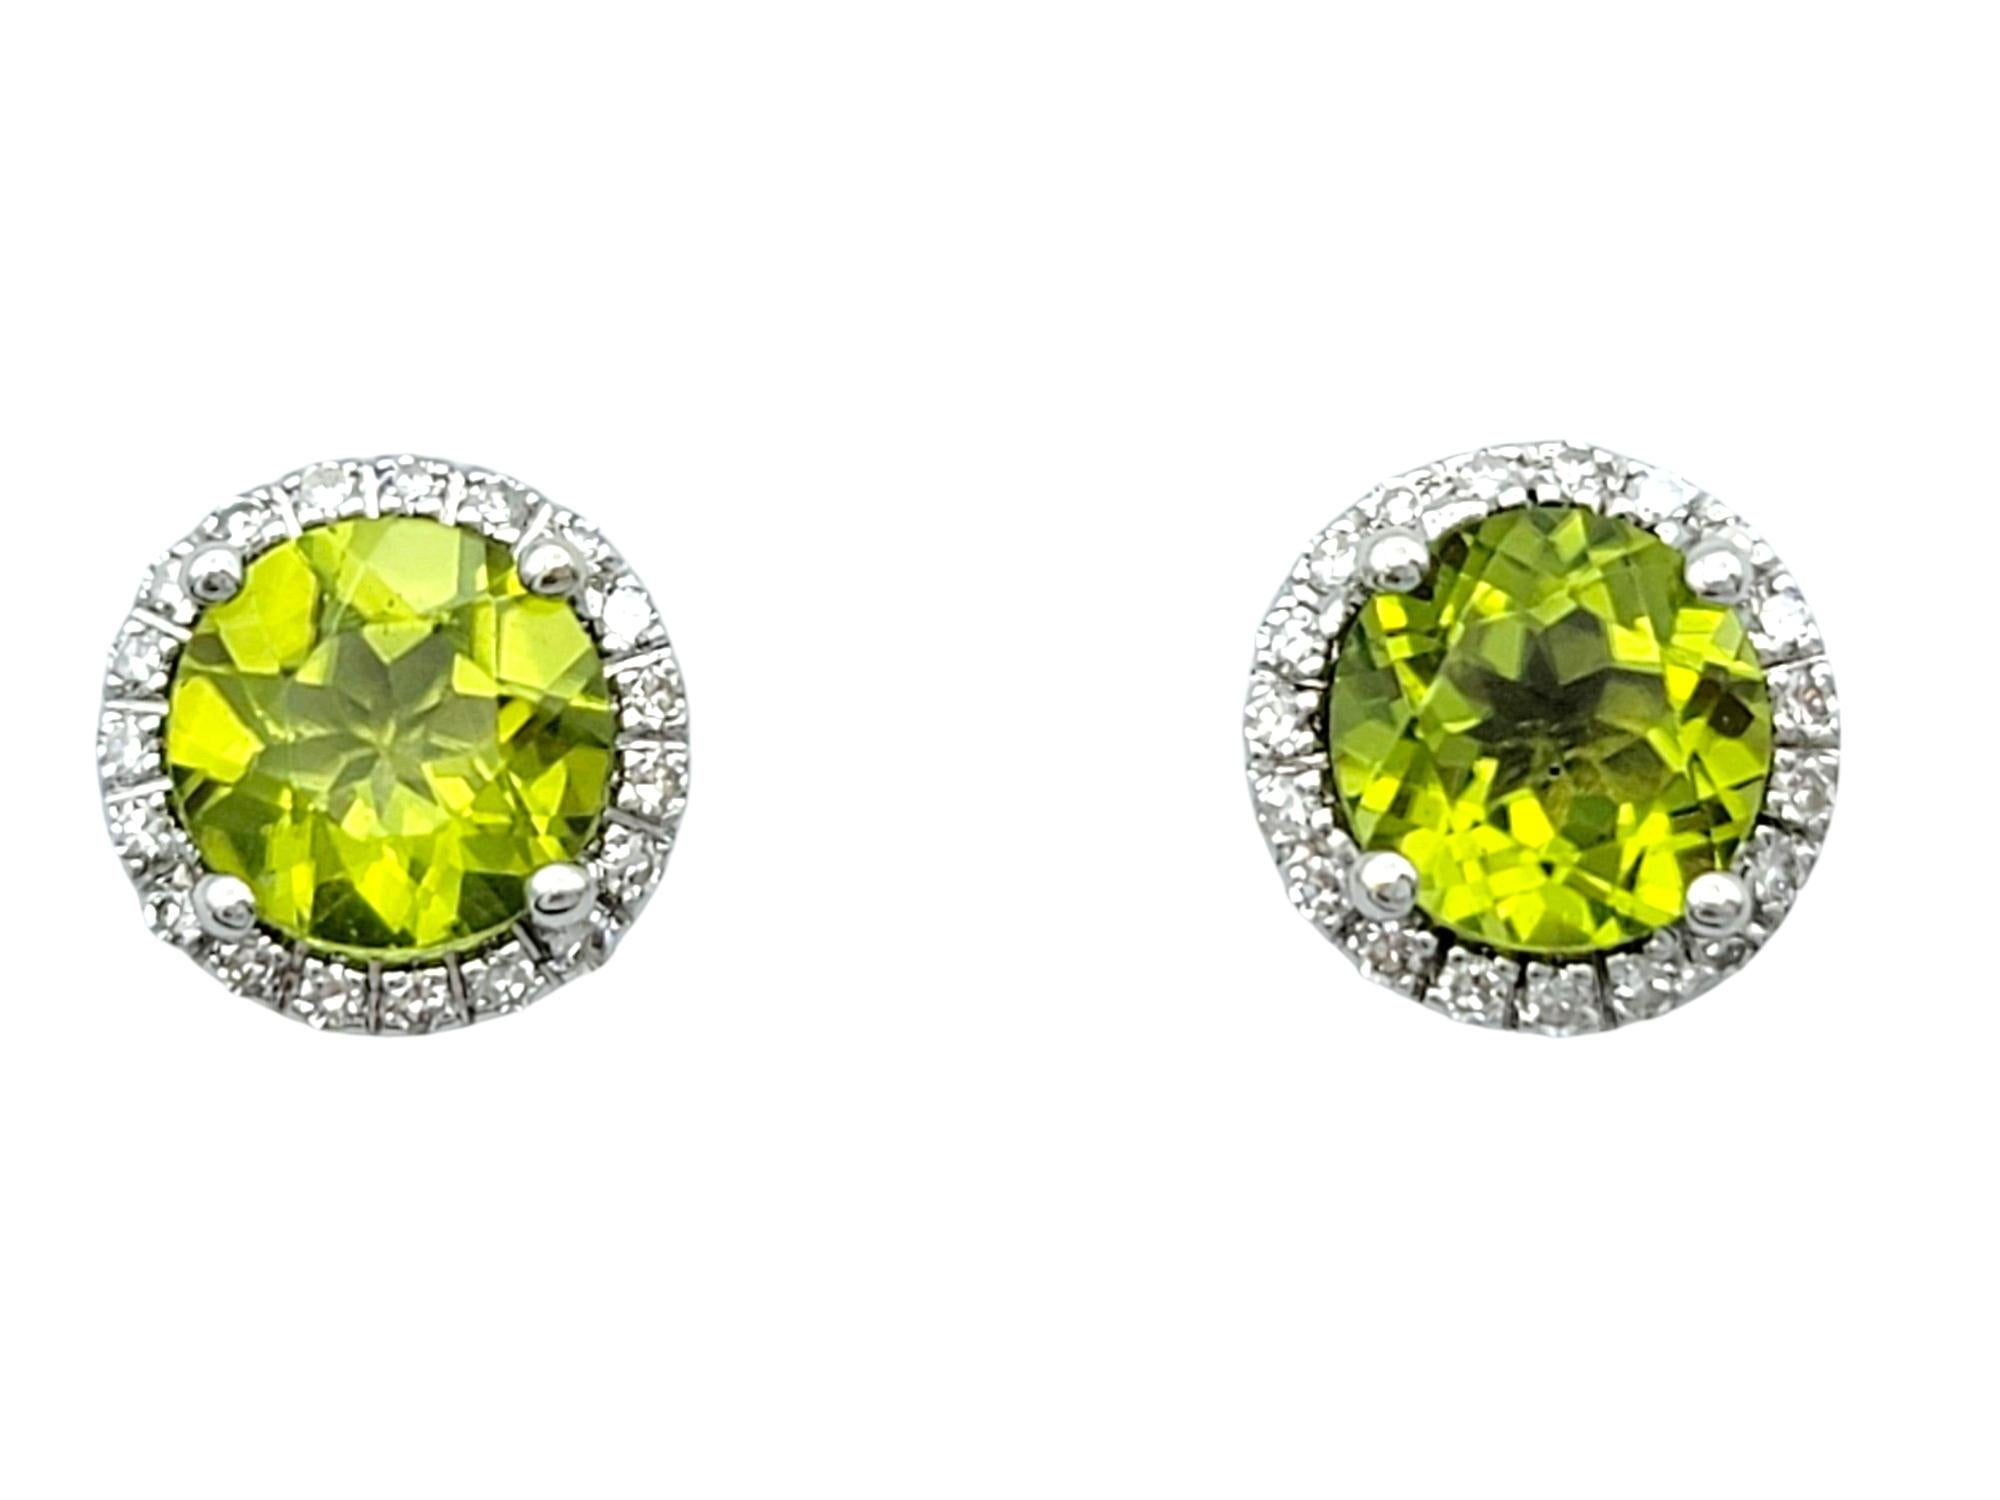 These elegant earrings feature vivid green peridot gemstones encircled by sparkling diamond halos, all set in lustrous 14 karat white gold. The peridot's vibrant hue is complemented by the brilliance of the surrounding diamonds, creating a